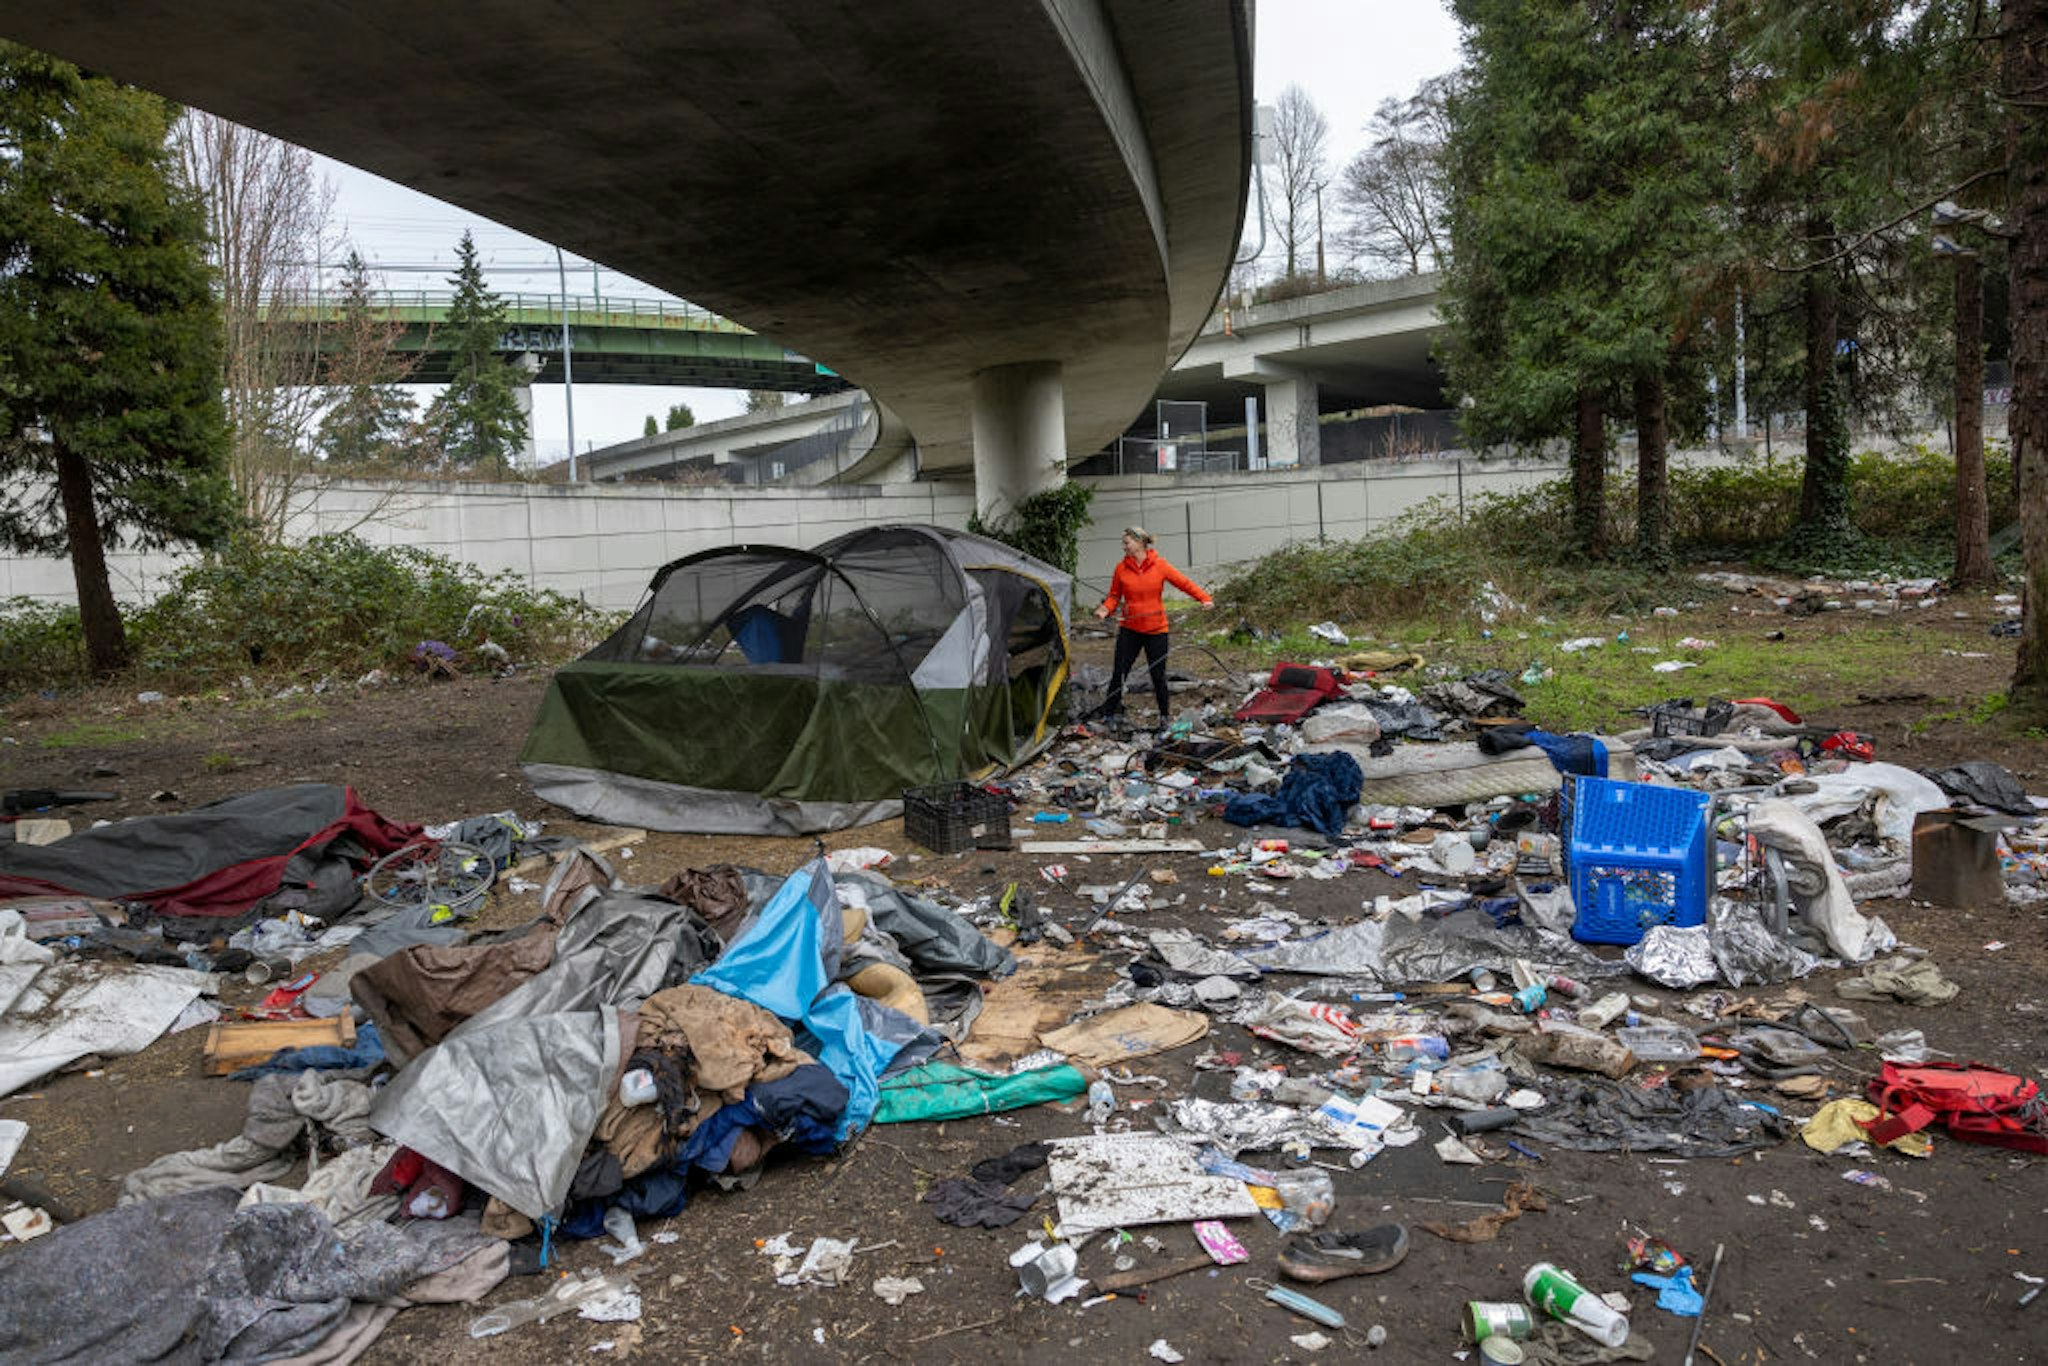 SEATTLE, WASHINGTON - MARCH 13: Andrea Suarez dismantles a tent as garbage lies piled at a homeless encampment on March 13, 2022 in Seattle, Washington. The accumulation of garbage at such sites has become a major issue in Seattle as the city tries to move the unhoused out of shared public spaces. Suarez is the executive director of We Heart Seattle, a non-profit that stages trash cleanups across the city. According to a recent report commissioned by Seattle Councilmember Andrew Lewis, the COVID-19 pandemic put undue pressure on the city's shelter system and delayed funds for new housing, leading to an increase in homelessness. (Photo by John Moore/Getty Images)